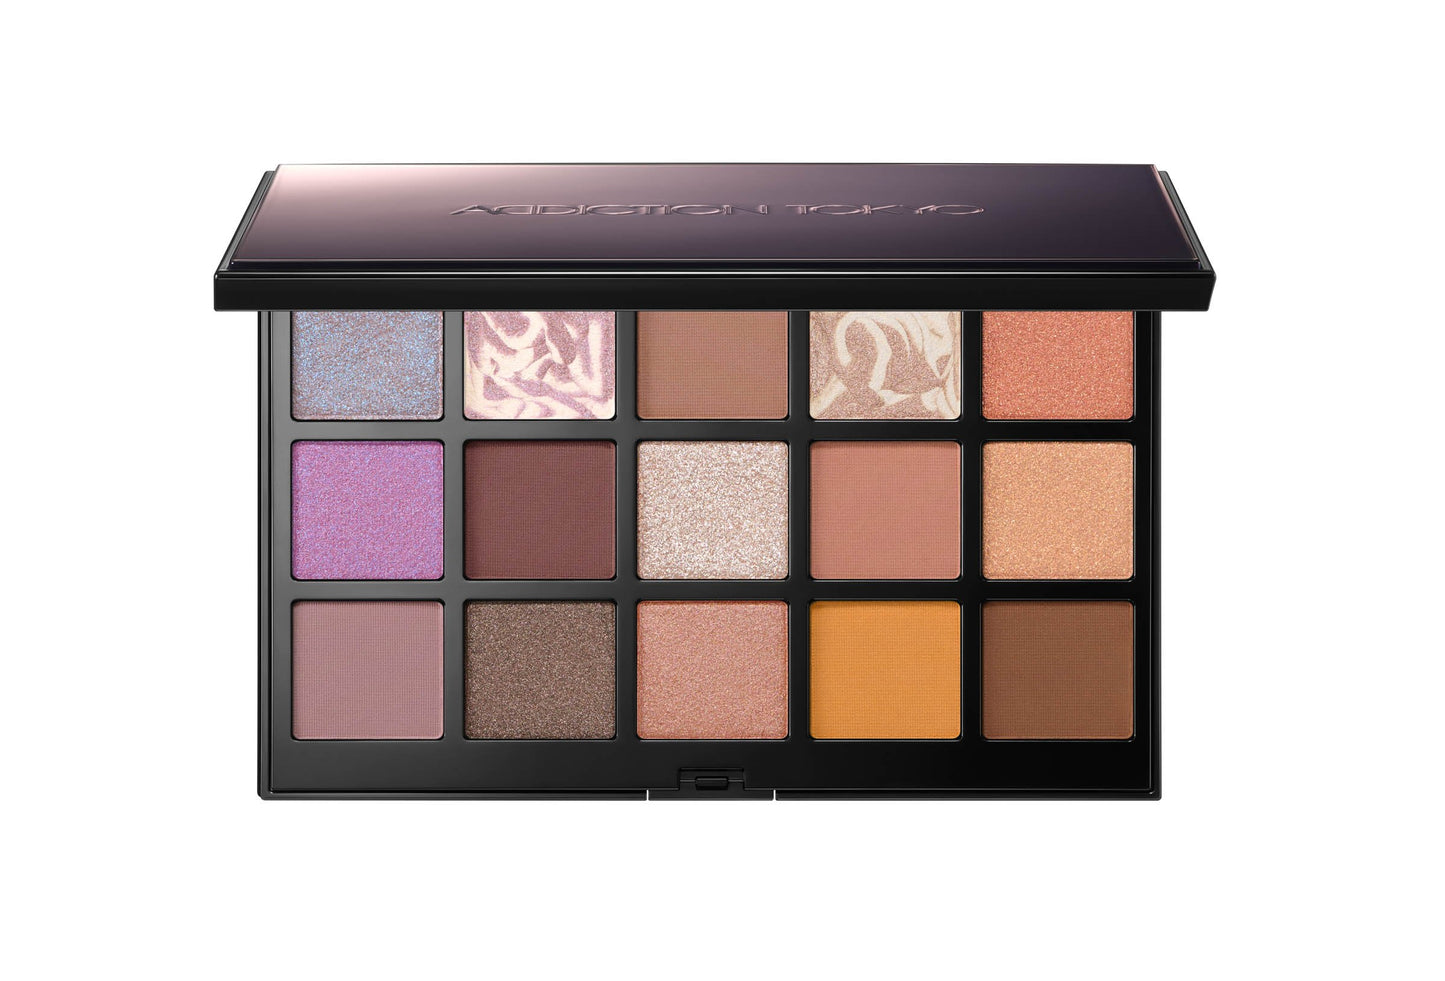 ADDICTION 15th Anniversary eyeshadow palette 'Rock the best moments' (July 15, 2024 on sale)